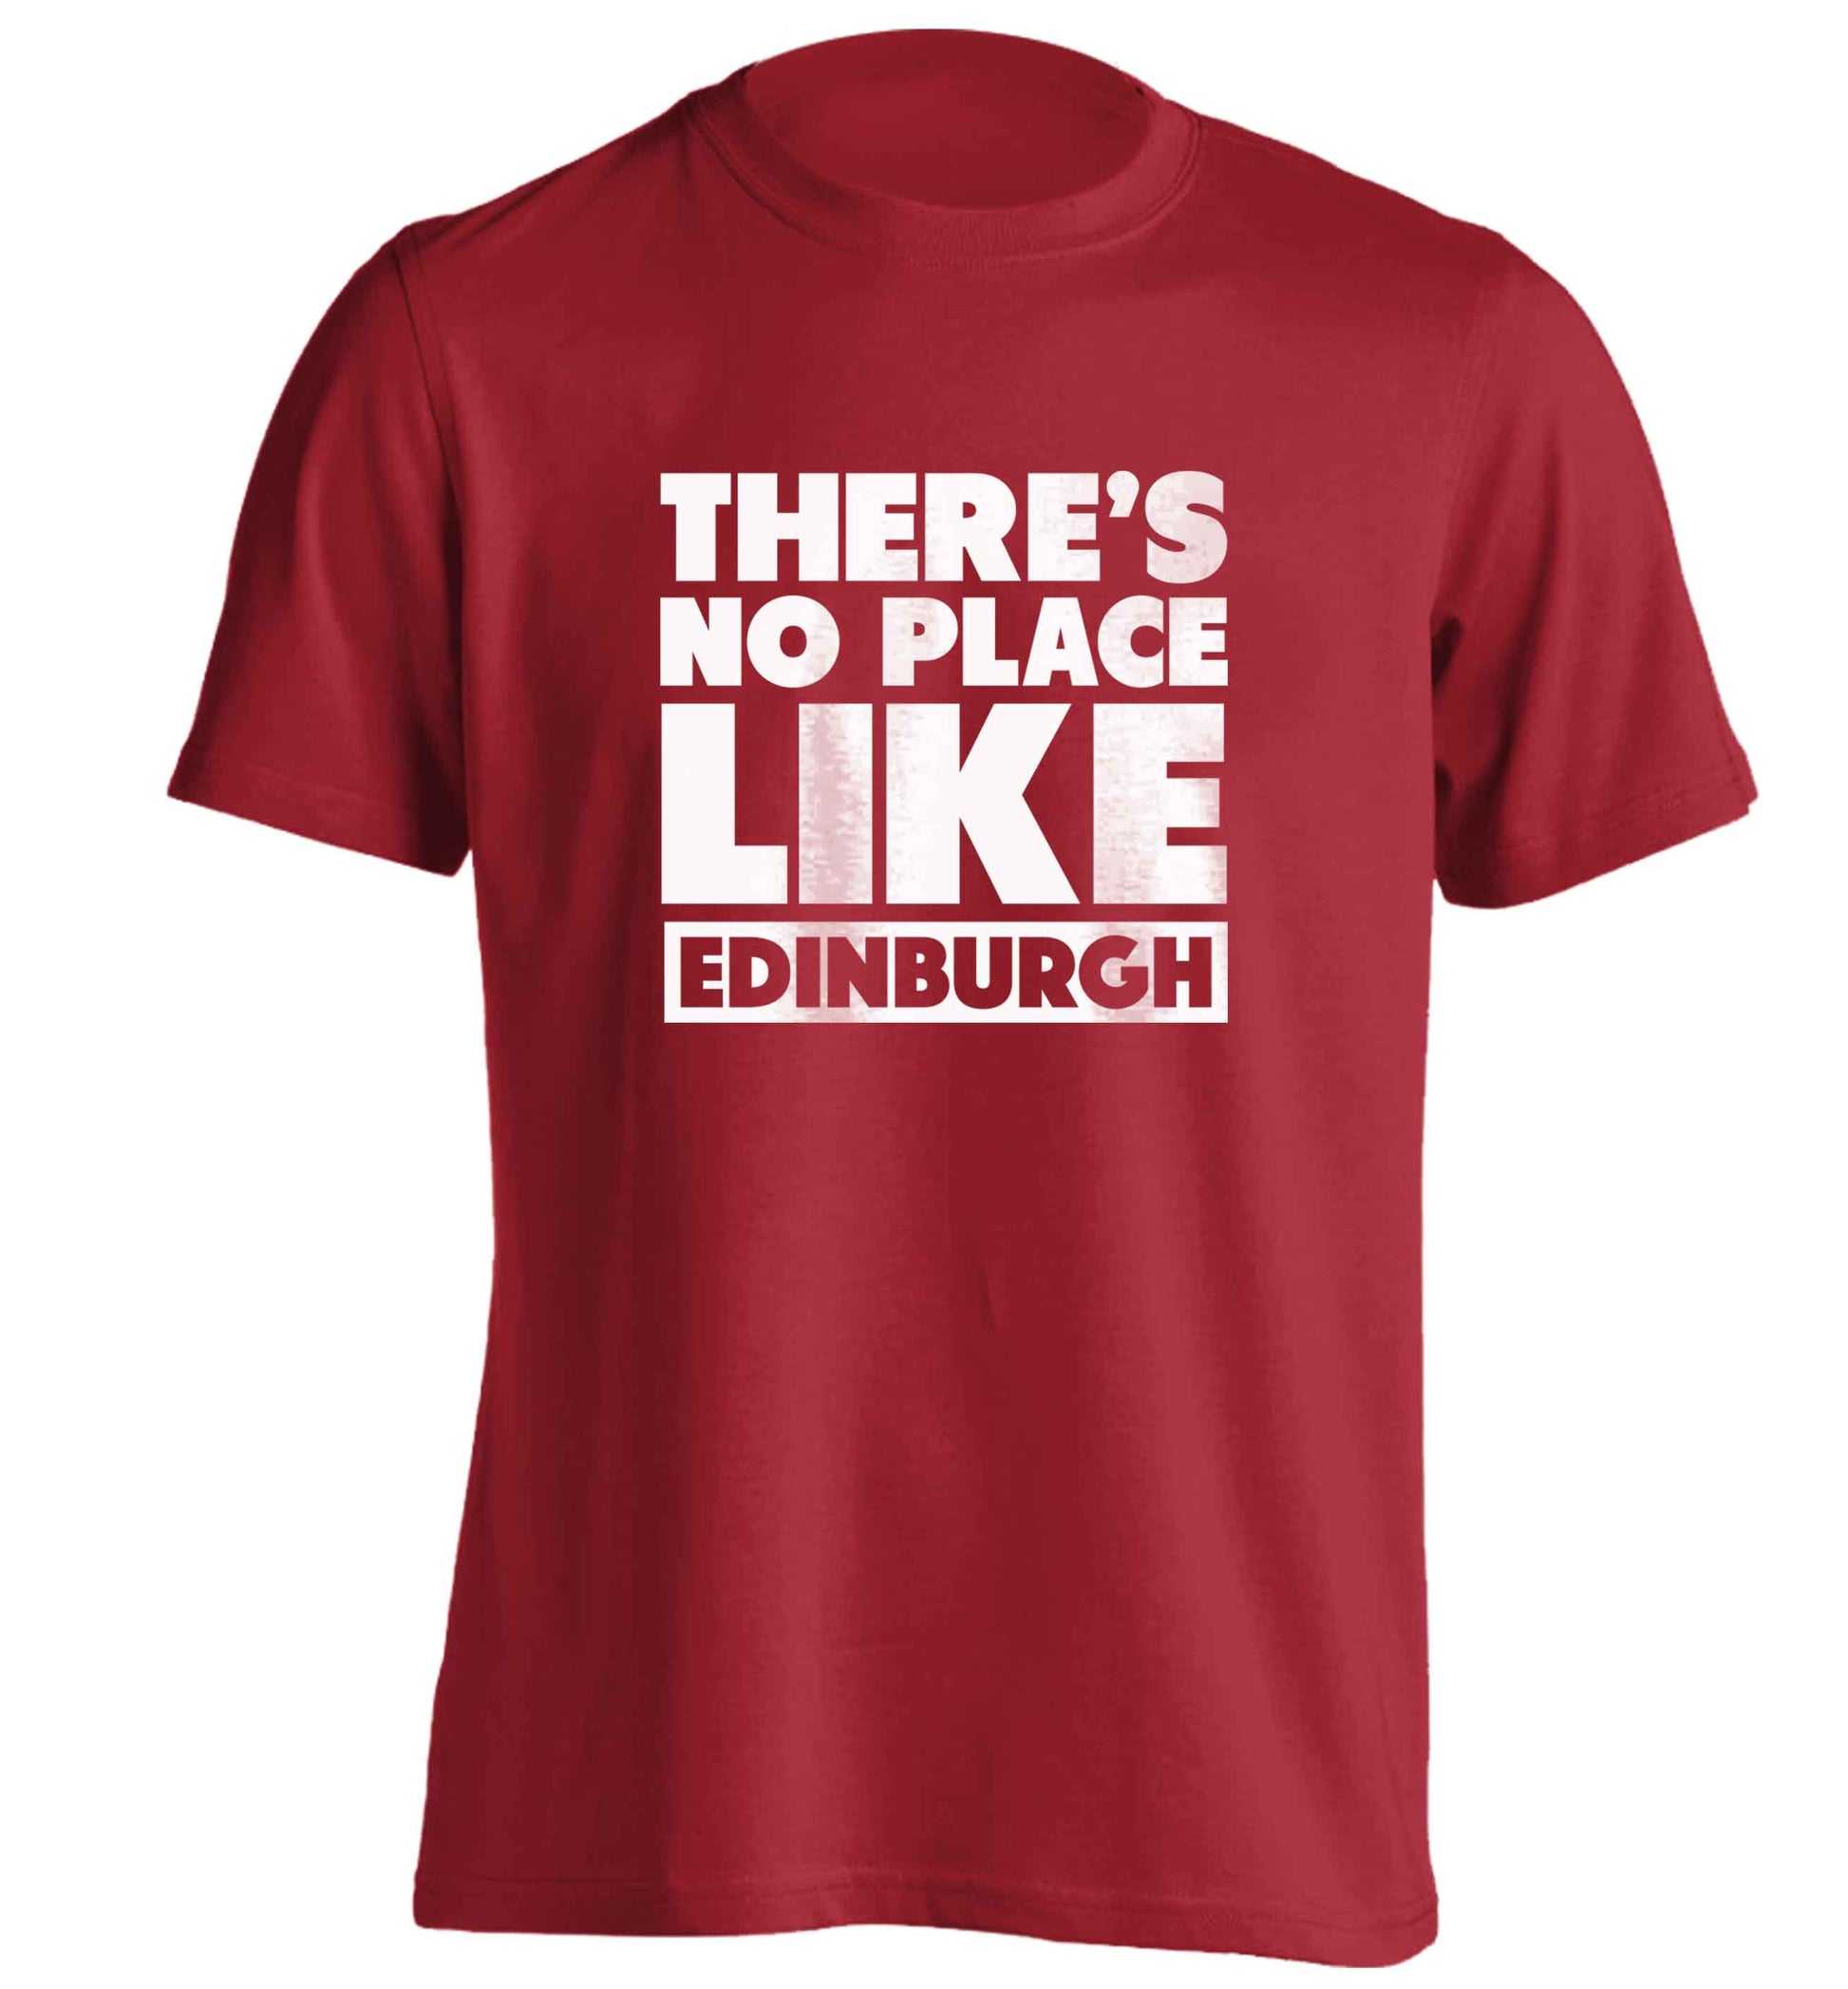 There's no place like Edinburgh adults unisex red Tshirt 2XL